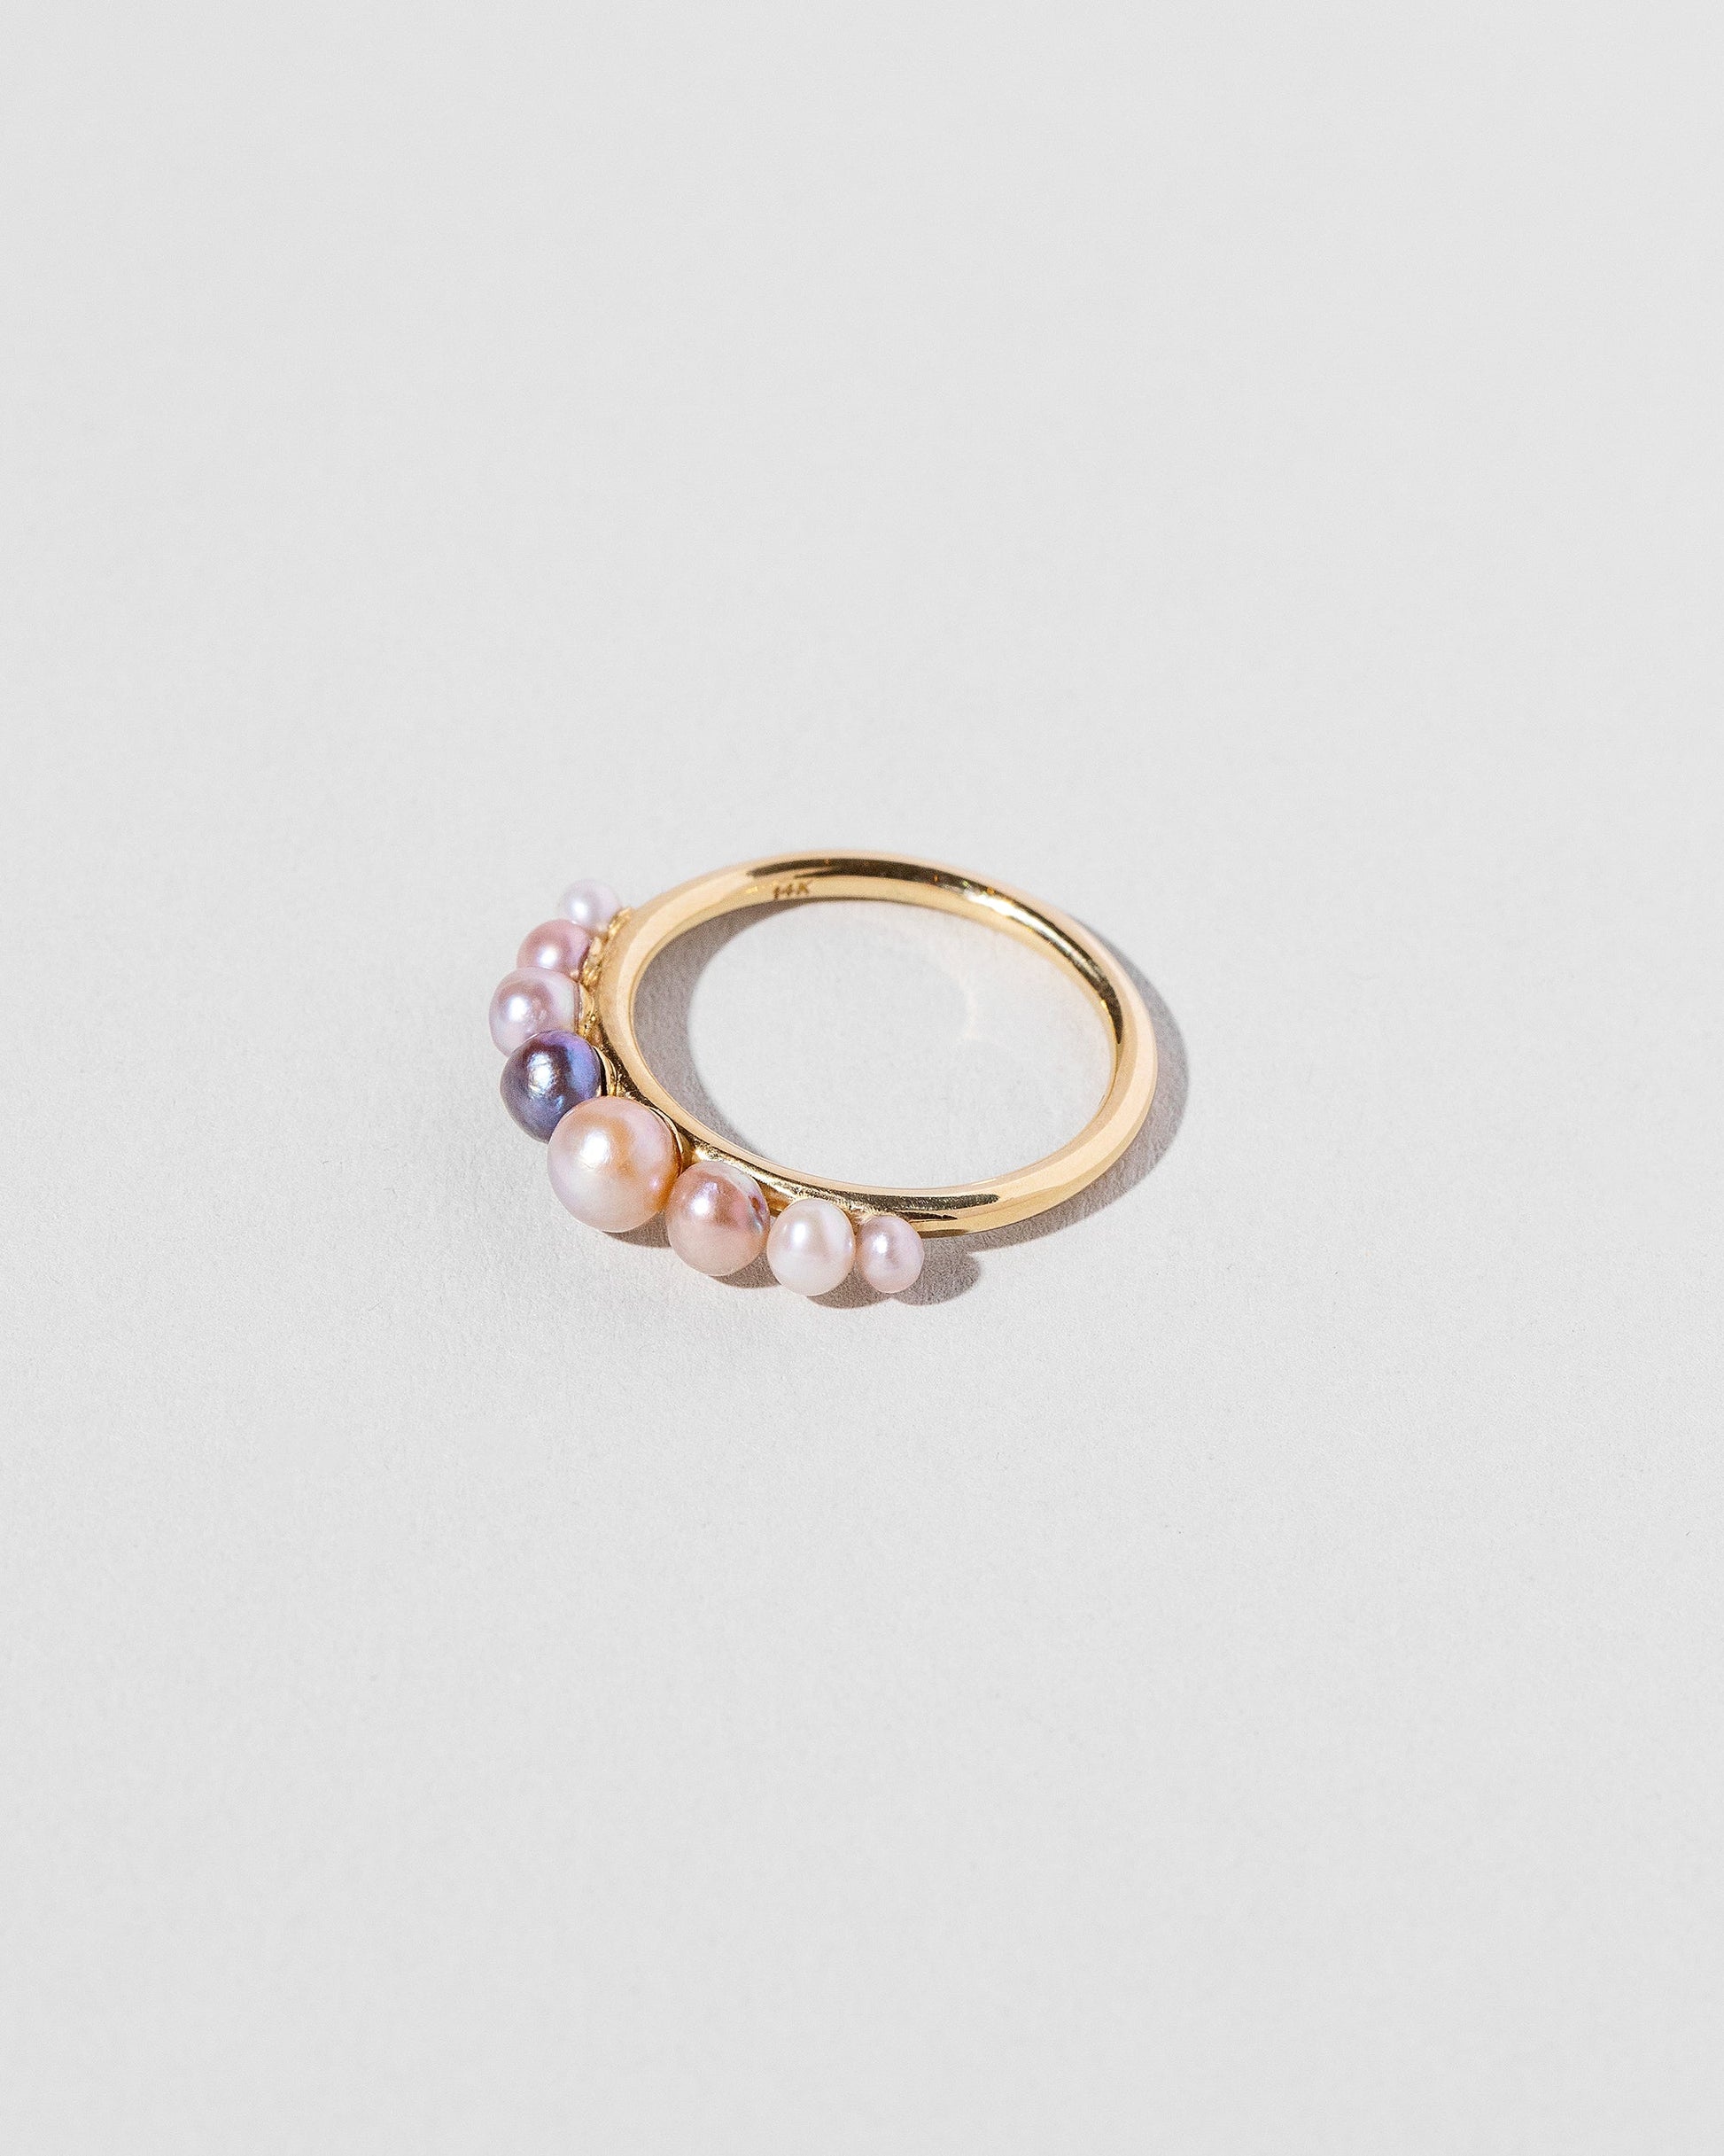  Circe Ring on light color background.